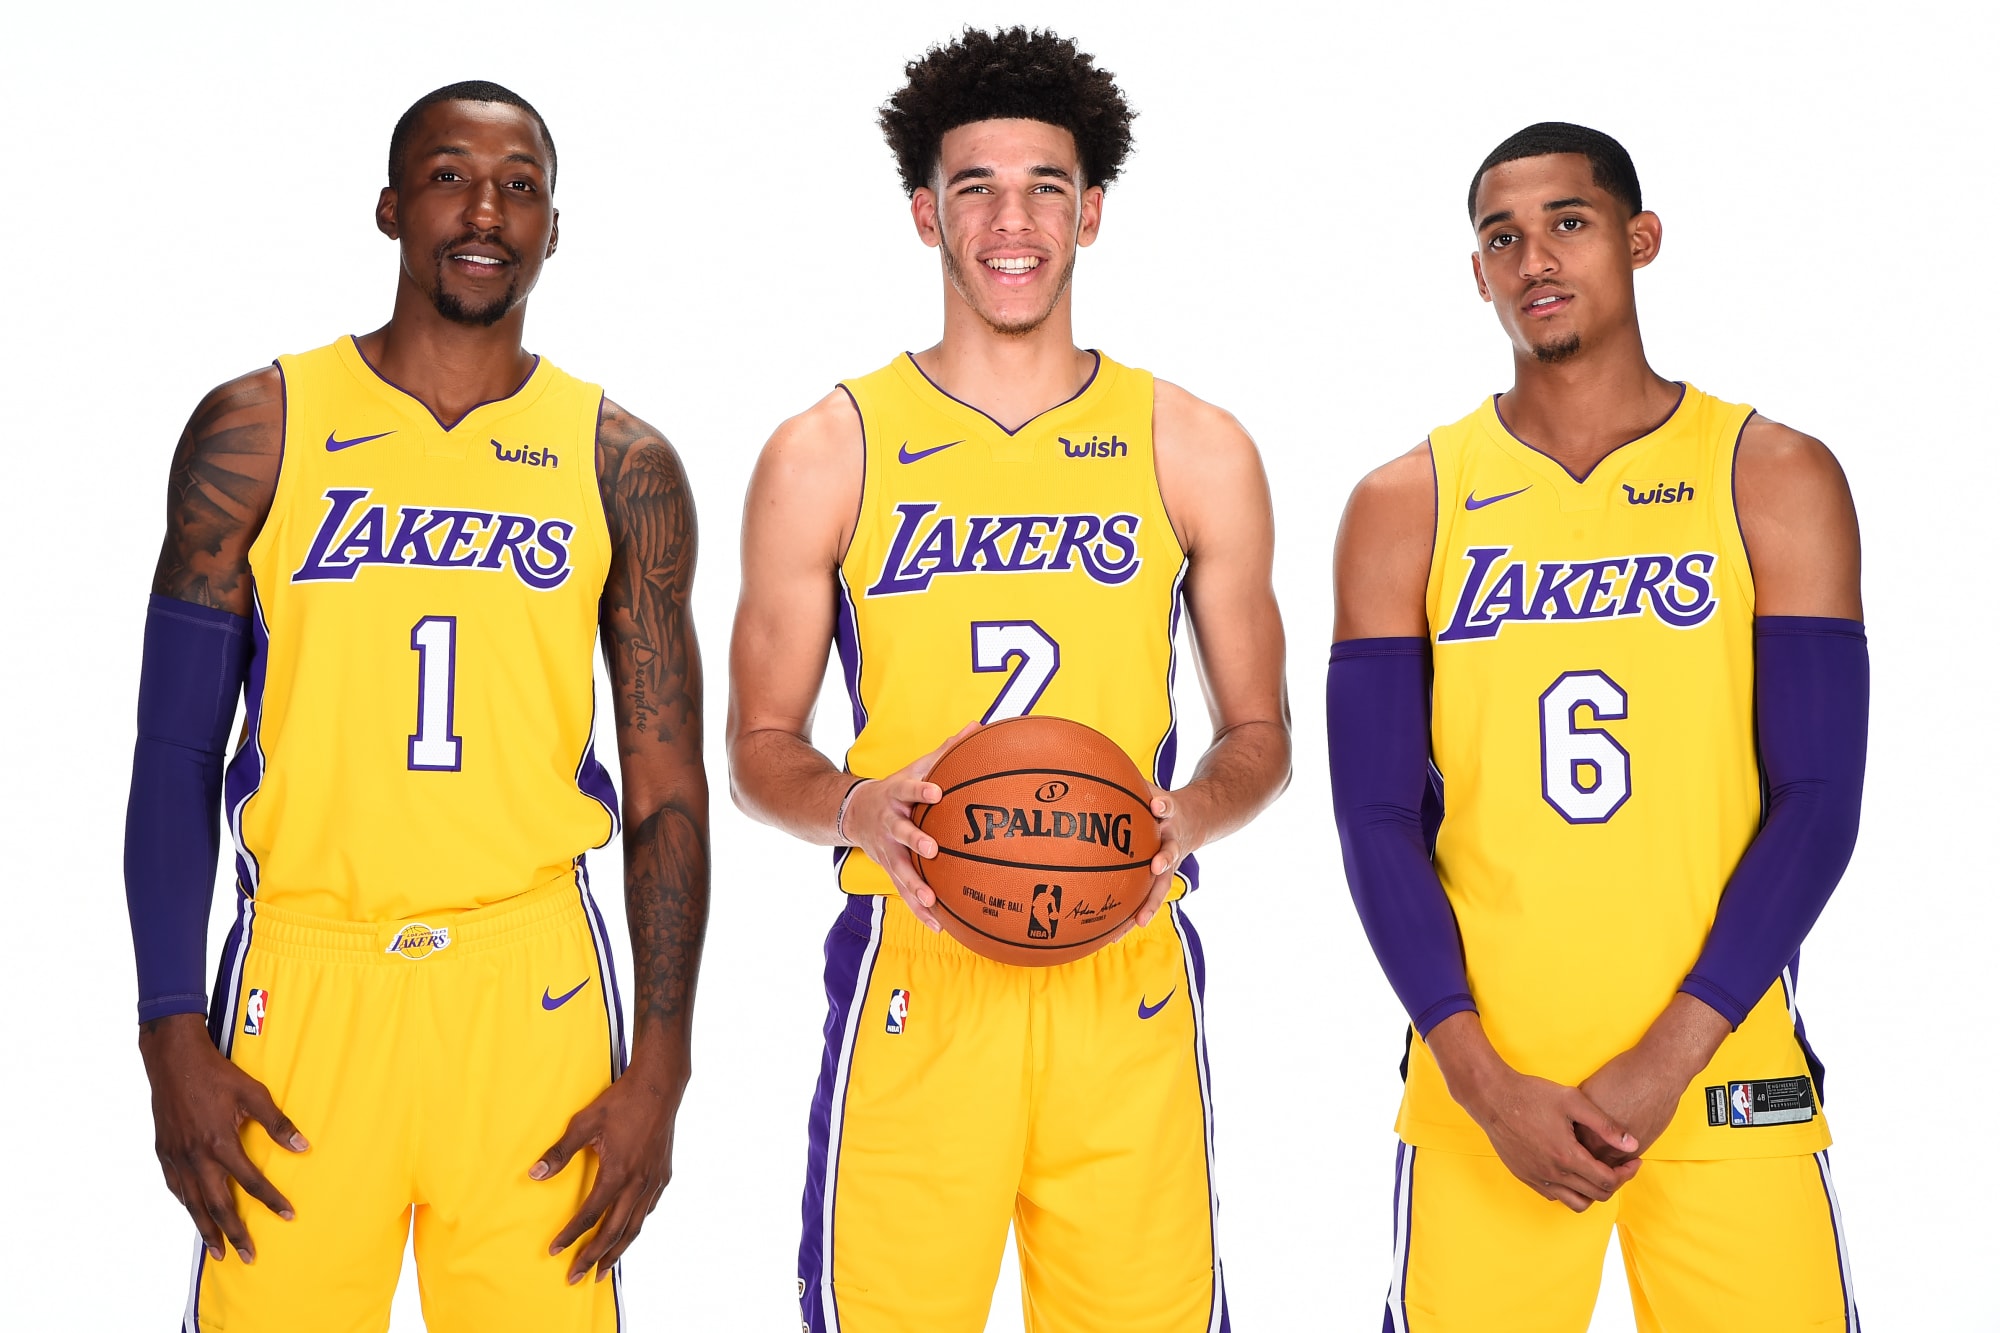 Los Angeles Lakers by the Numbers for the 2017-18 season